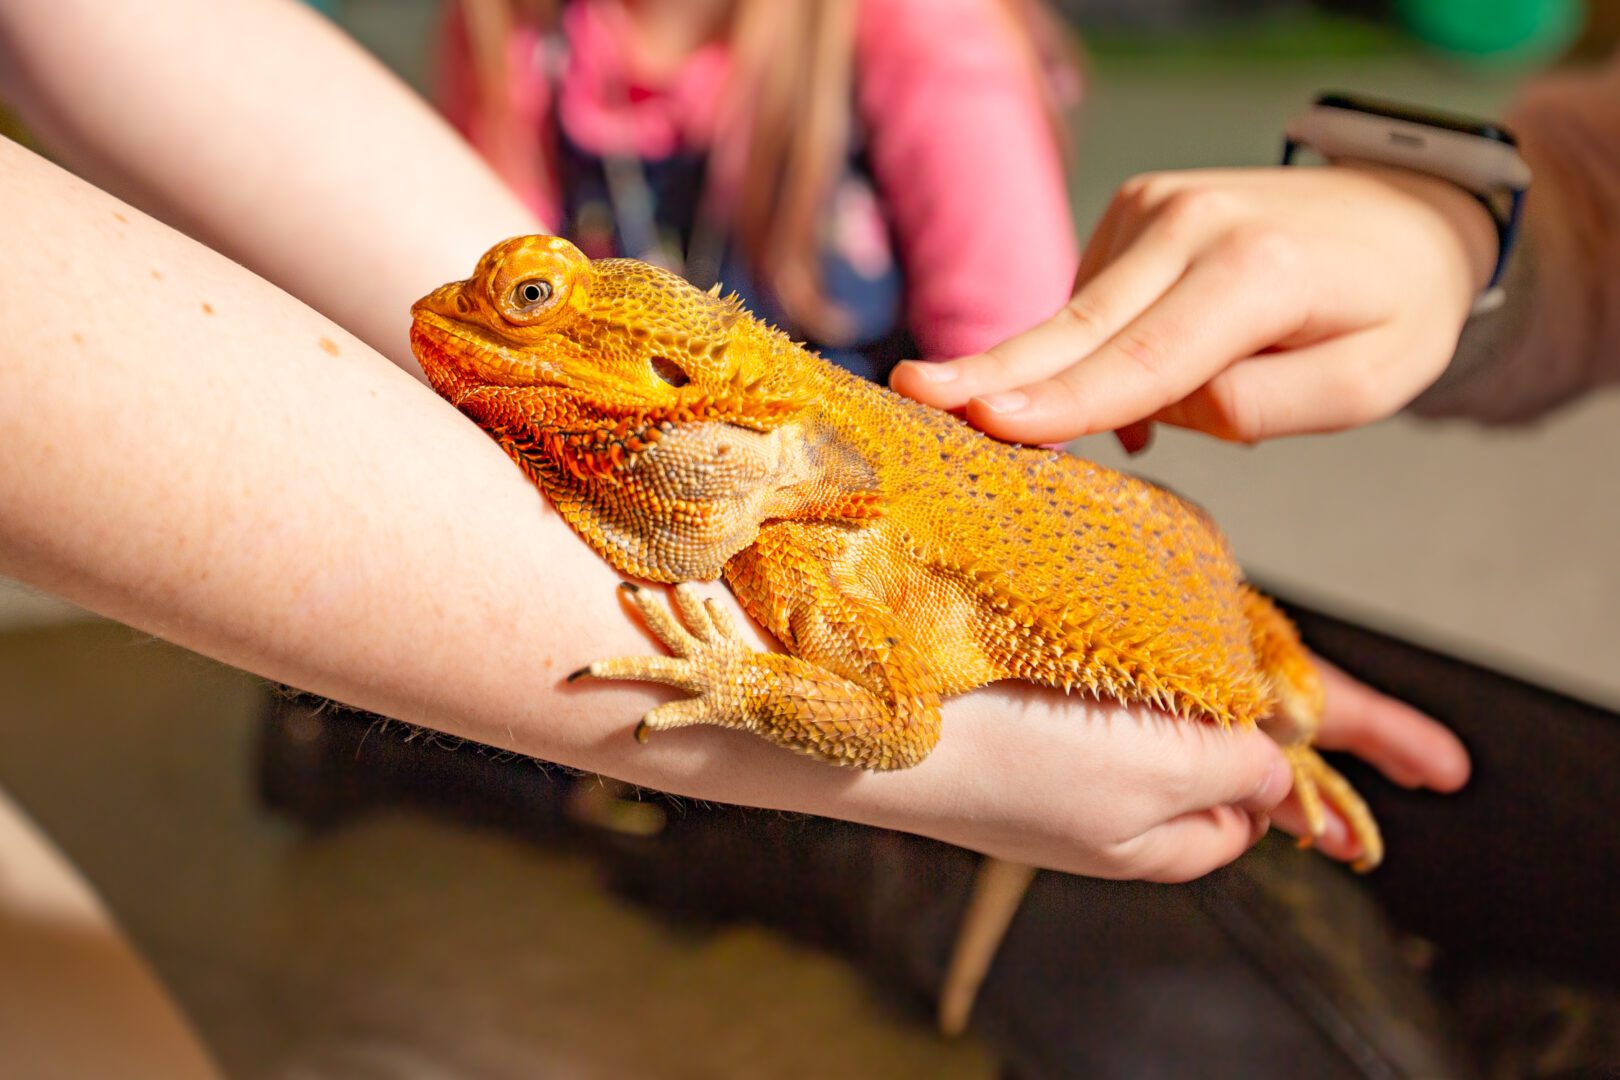 A person holding an orange lizard in their hands.